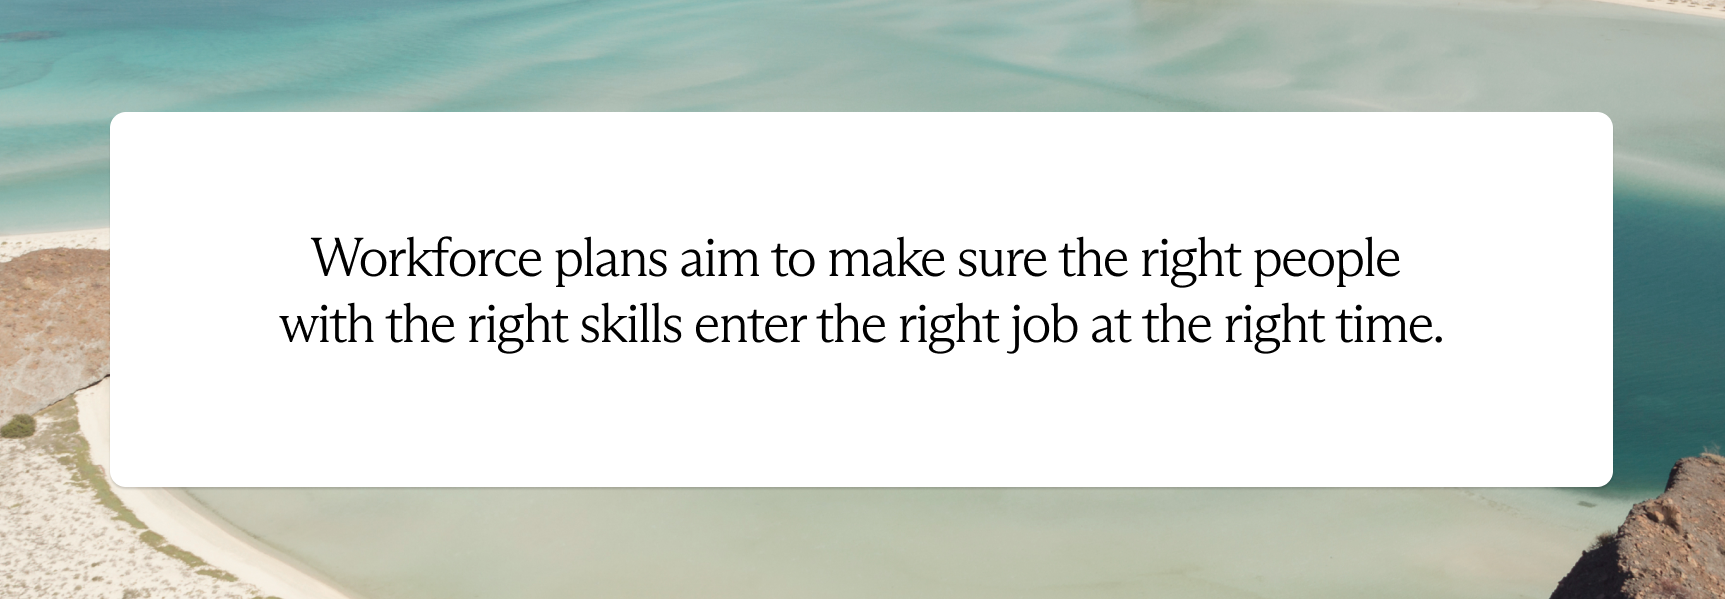 Workforce plans aim to make sure the right people with the right skills enter the right job at the right time.